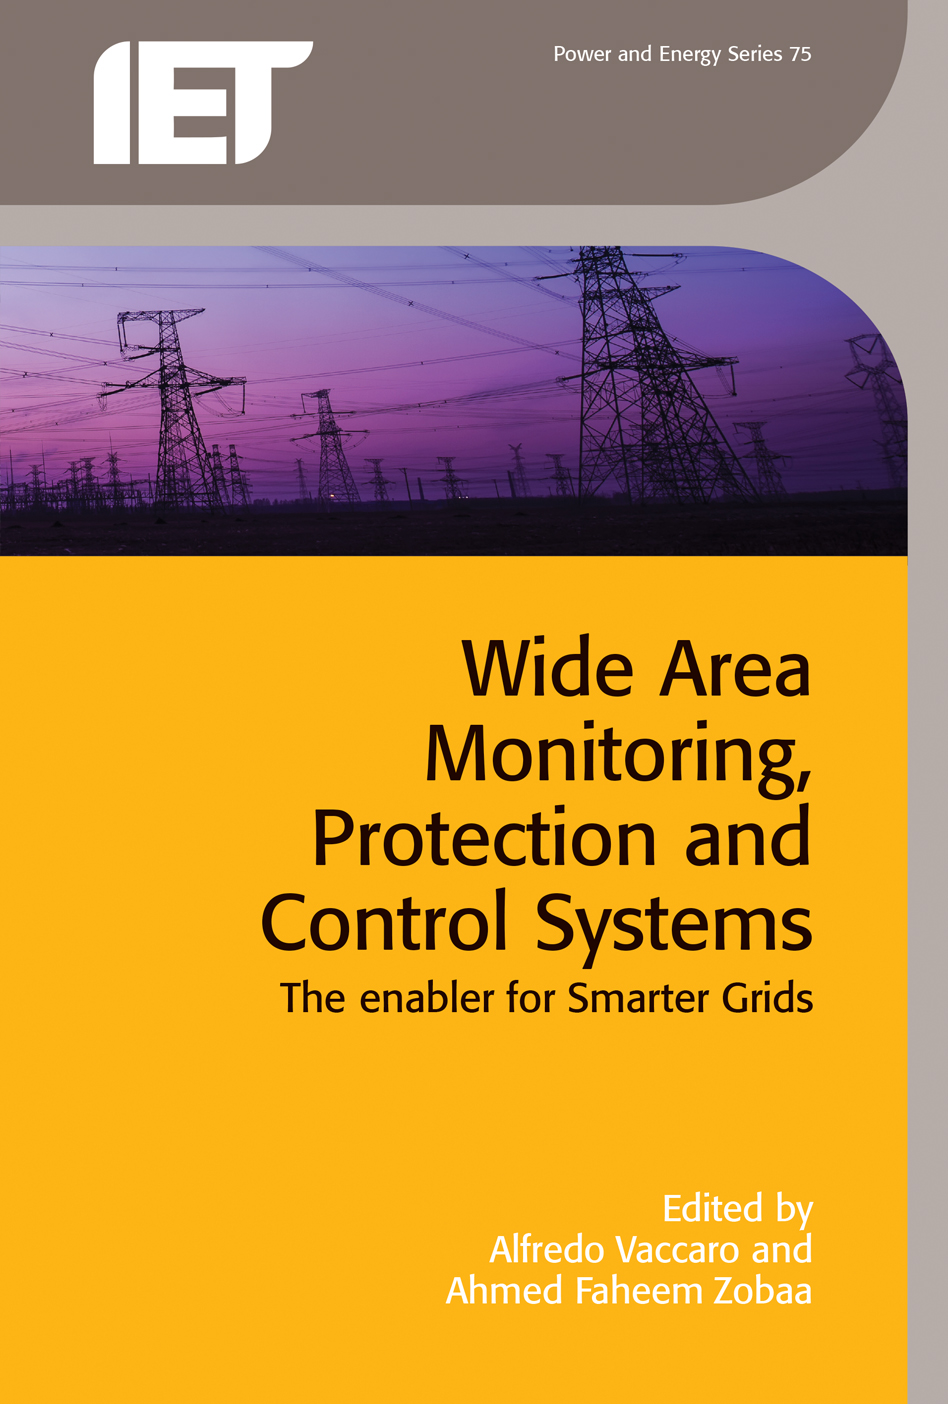 Wide Area Monitoring, Protection and Control Systems, The enabler for smarter grids